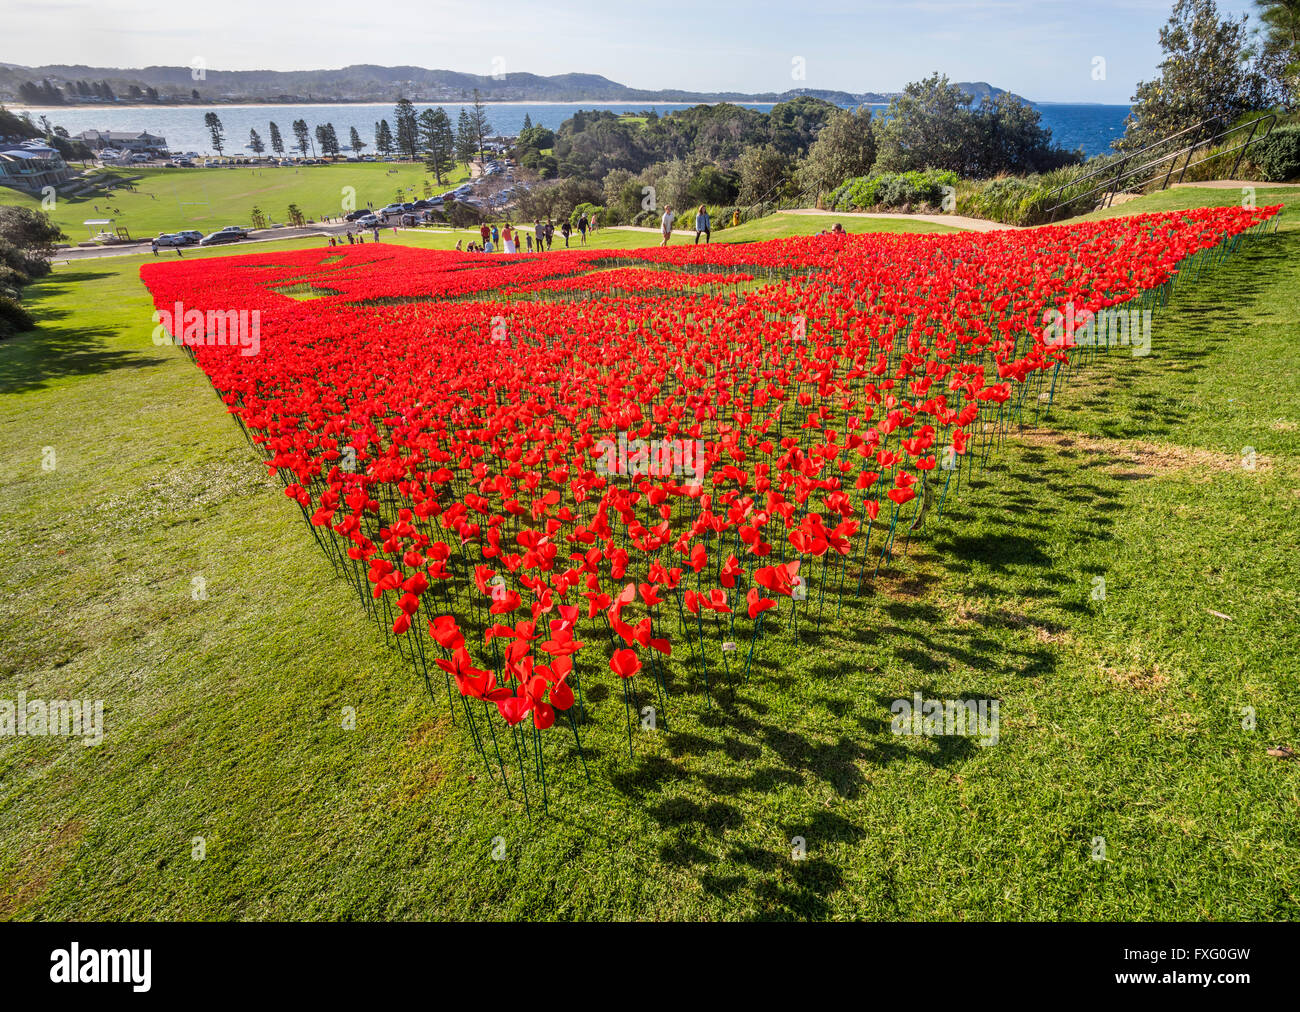 Terrigal Central Coast, New South Wales, Australia. 15th April, 2016. field of poppies installed on the slope of the Skillion promontory at Terrigal on the Central Coast of New South Wales, Australia. The Poppy Project coincides with ANZAC Day on April 25th (a public holiday in Australia) and commemorates the 100 years of ANZAC Centenary. Credit:  Manfred Gottschalk/Alamy Live News Stock Photo